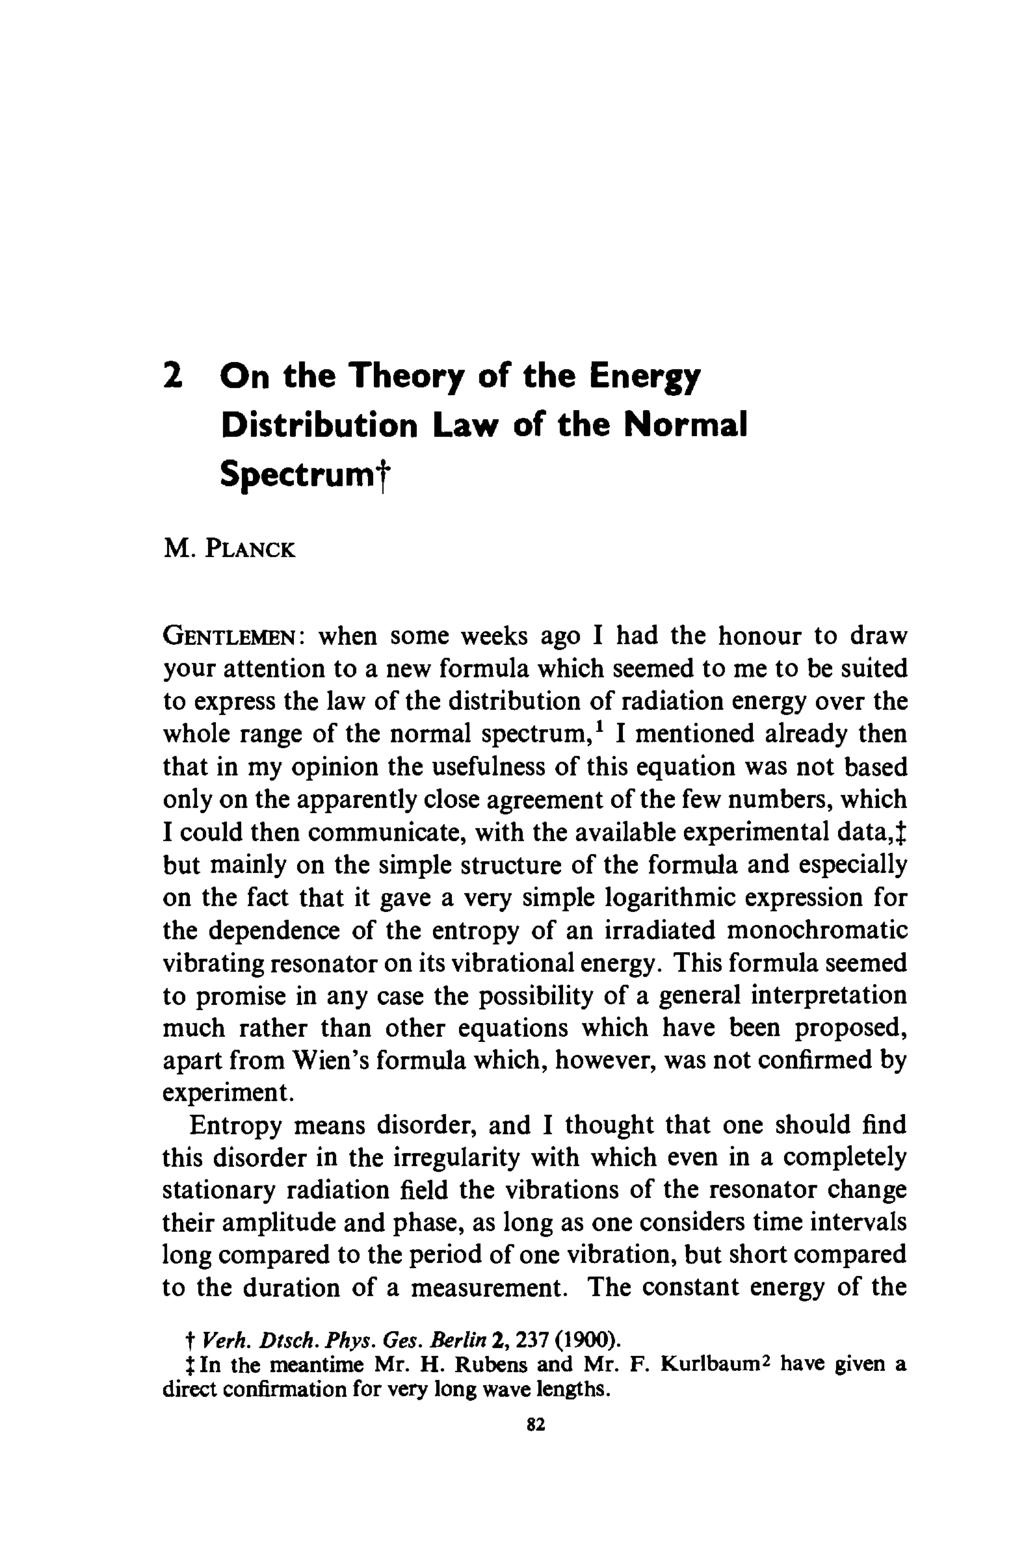 On the Theory of the Energy Distribution Law of the Normal Spectrum! M.